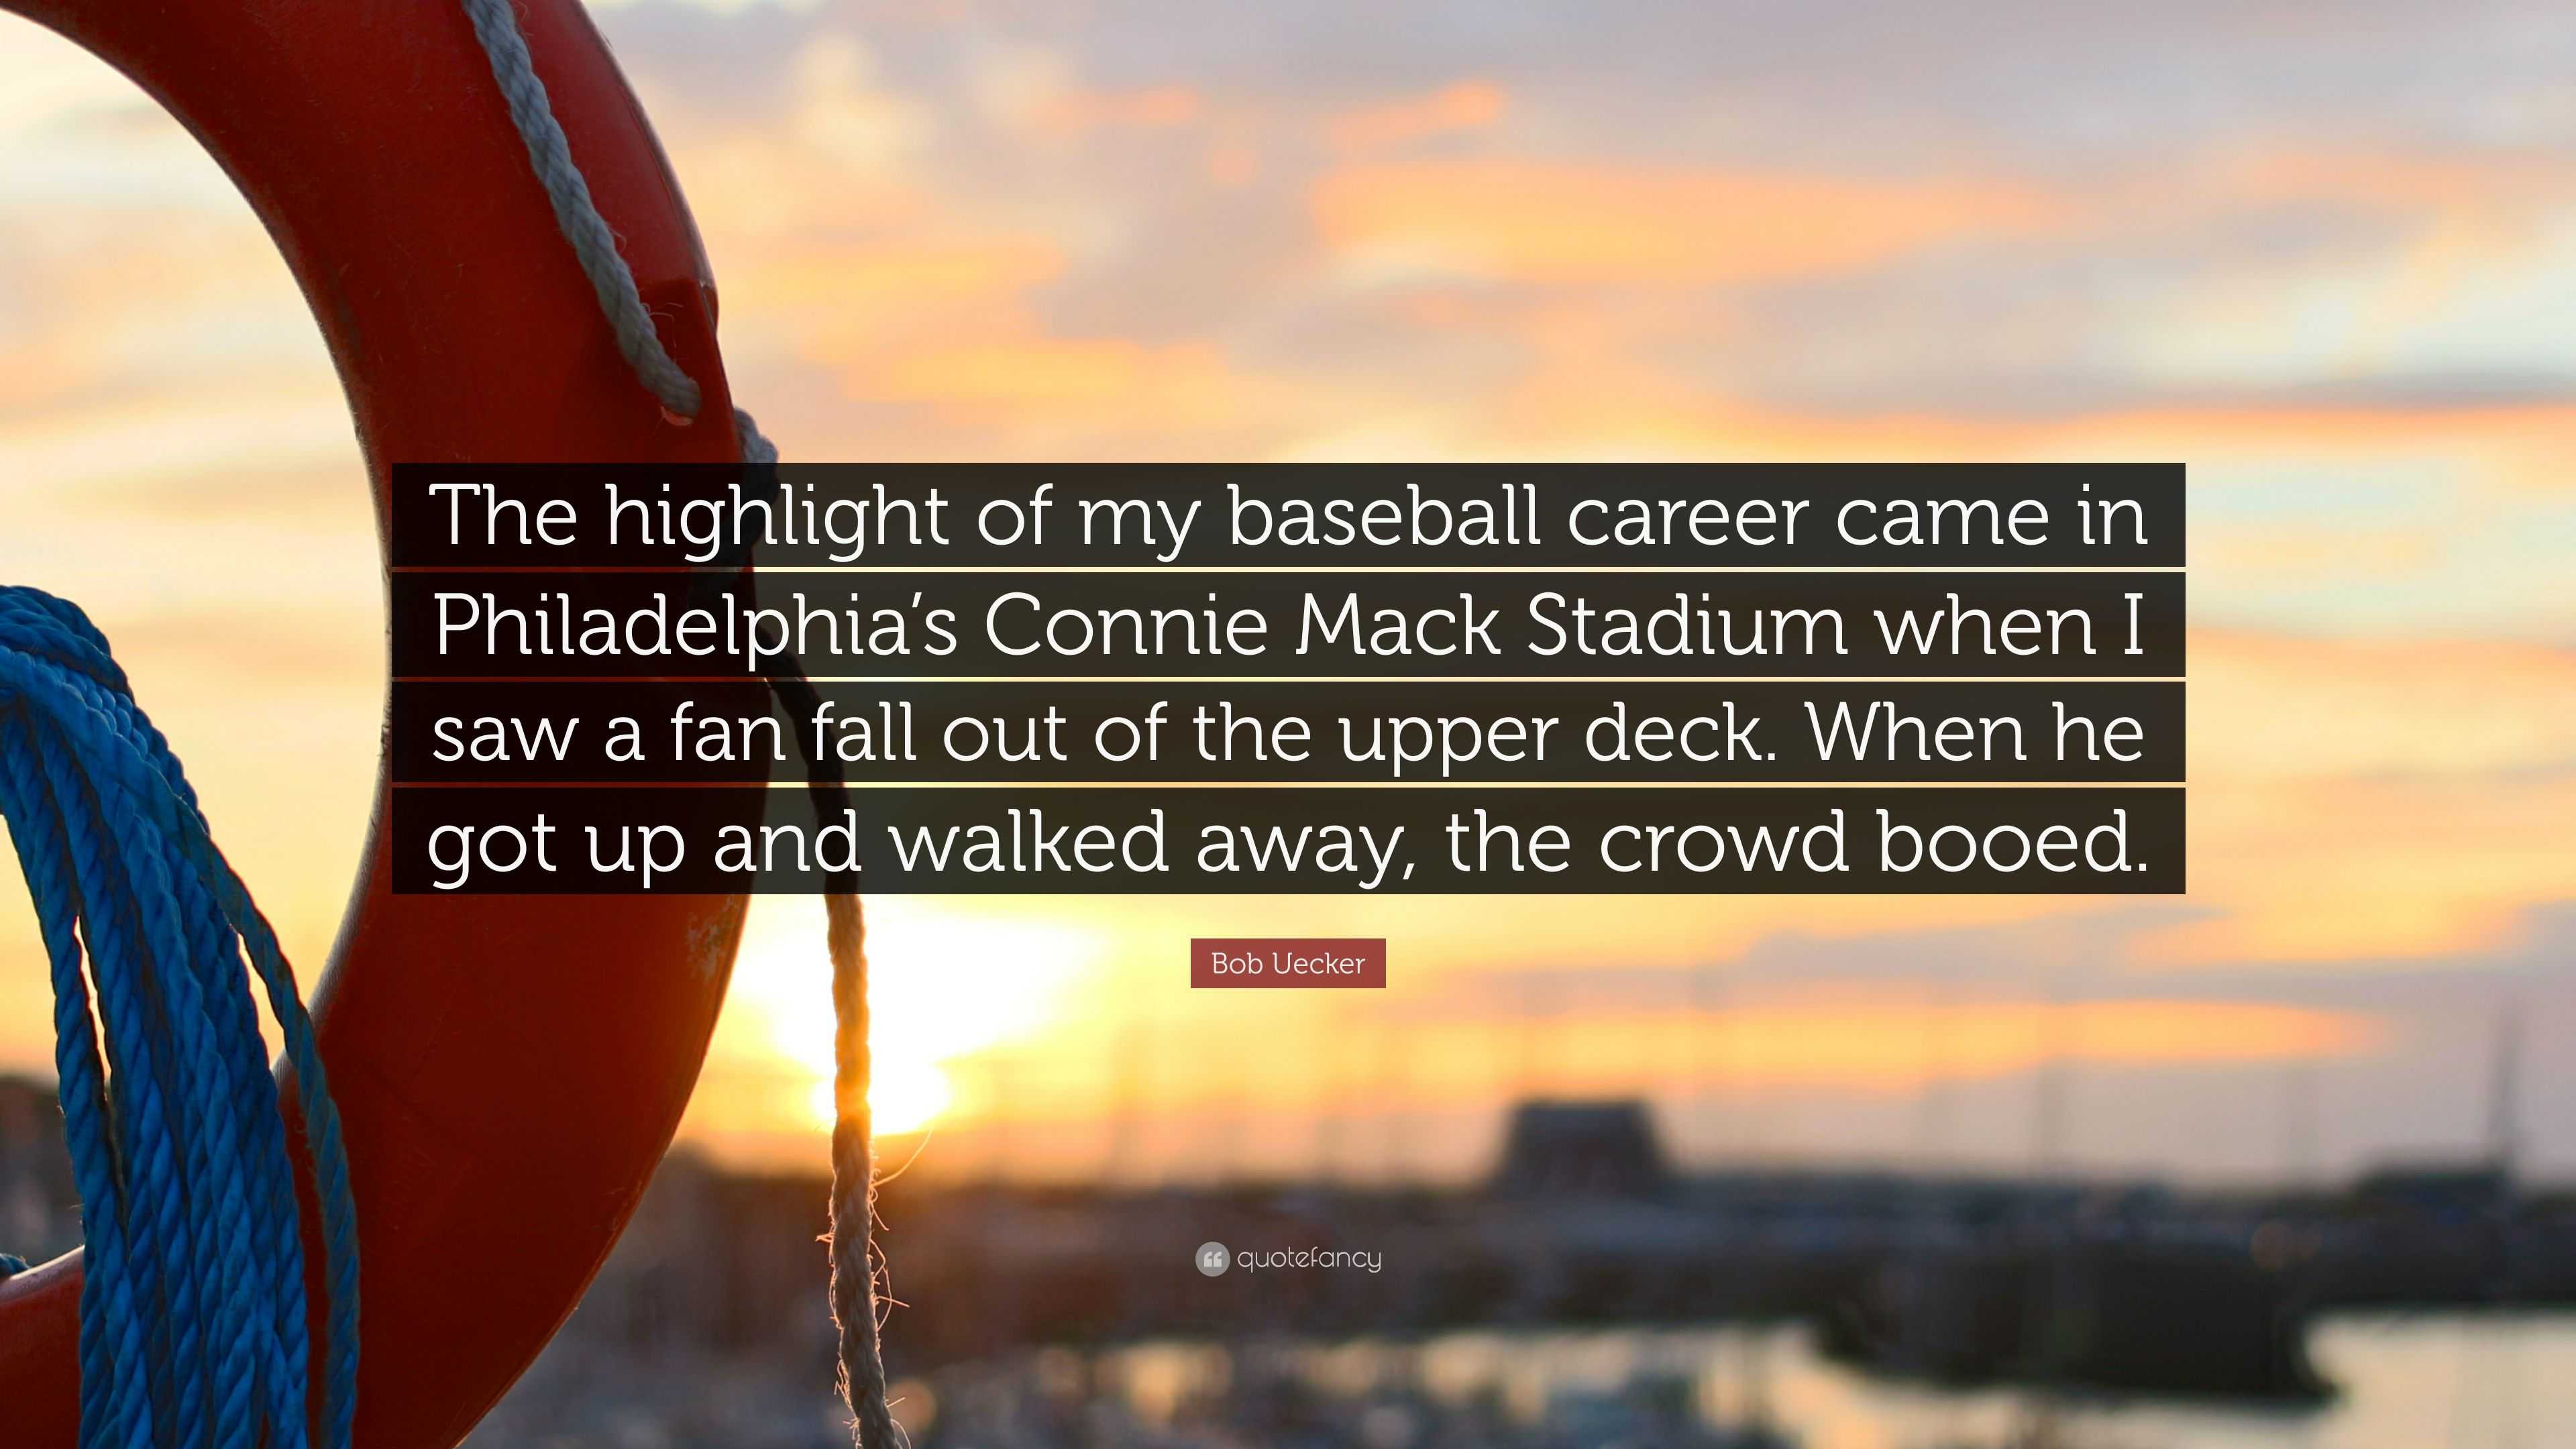 Bob Uecker Quotes for Baseball Fans